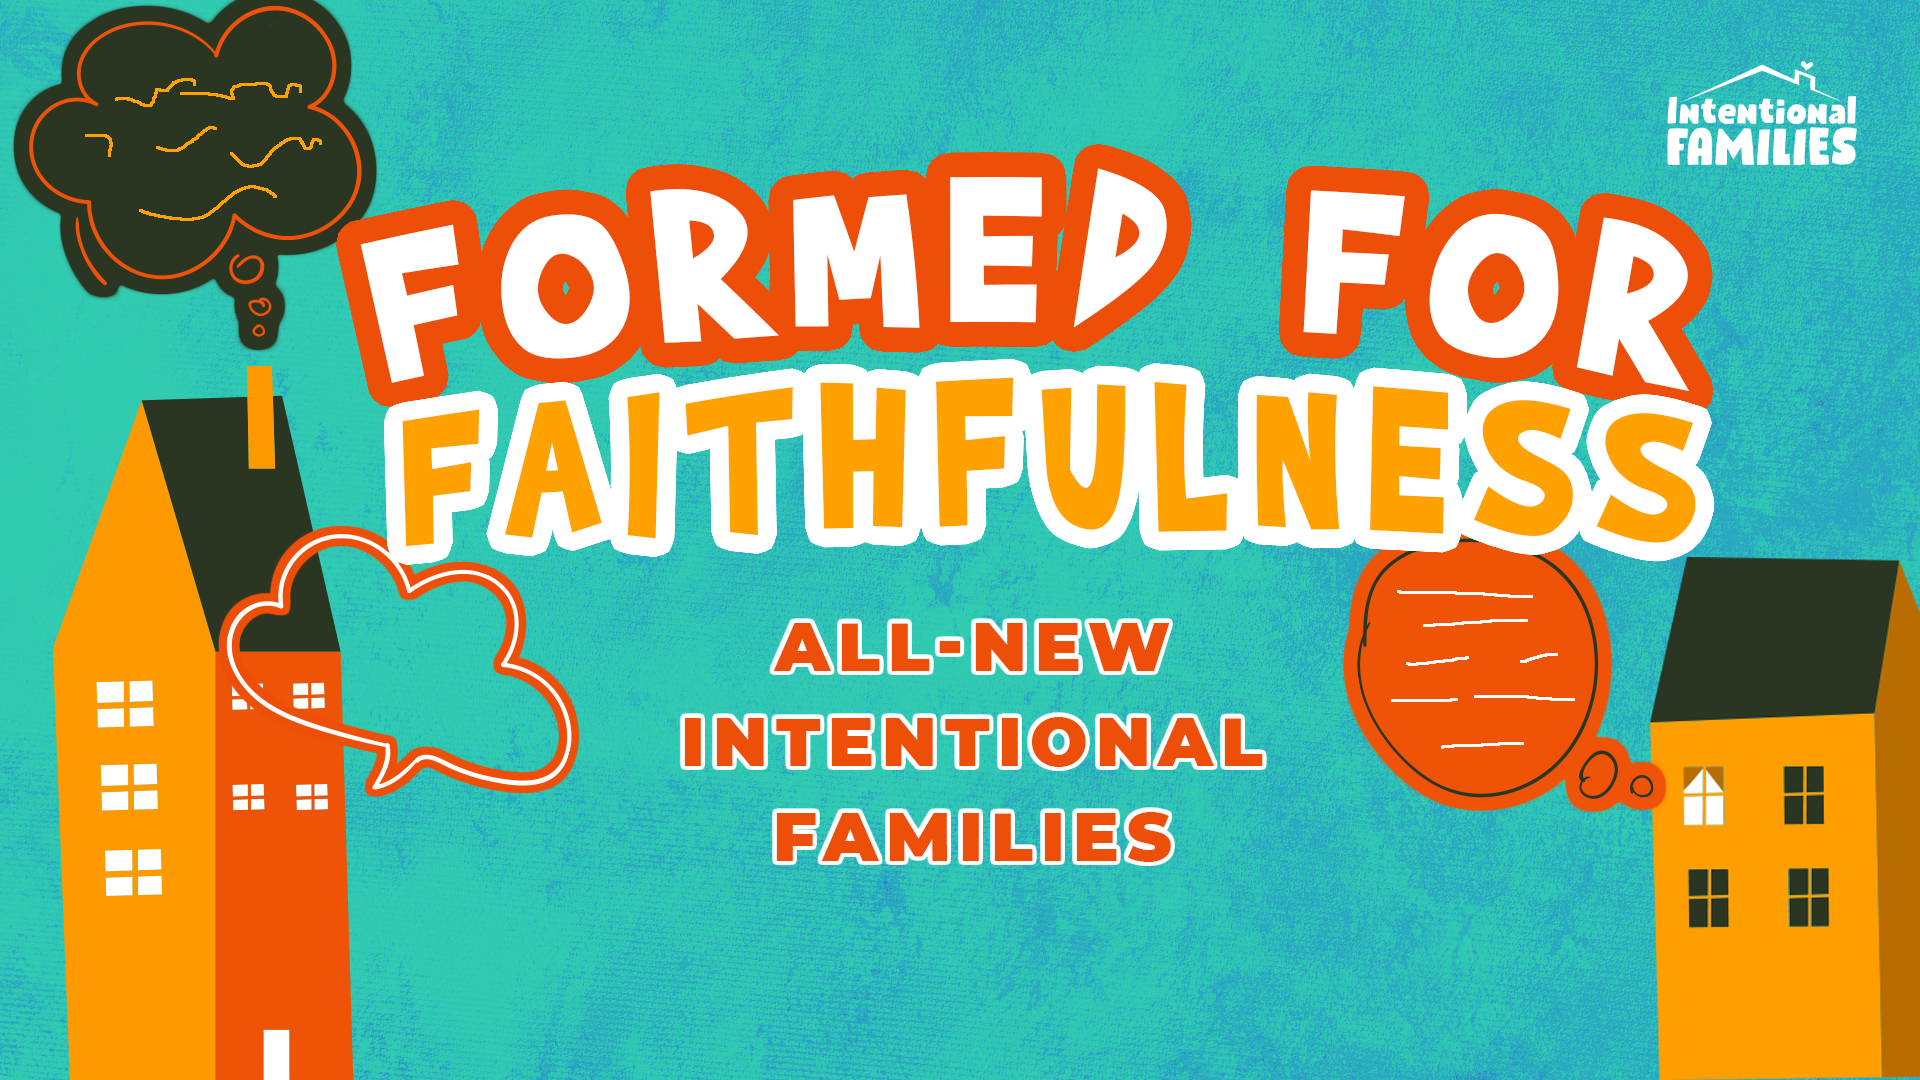 Intentional Families: Formed for Faithfulness